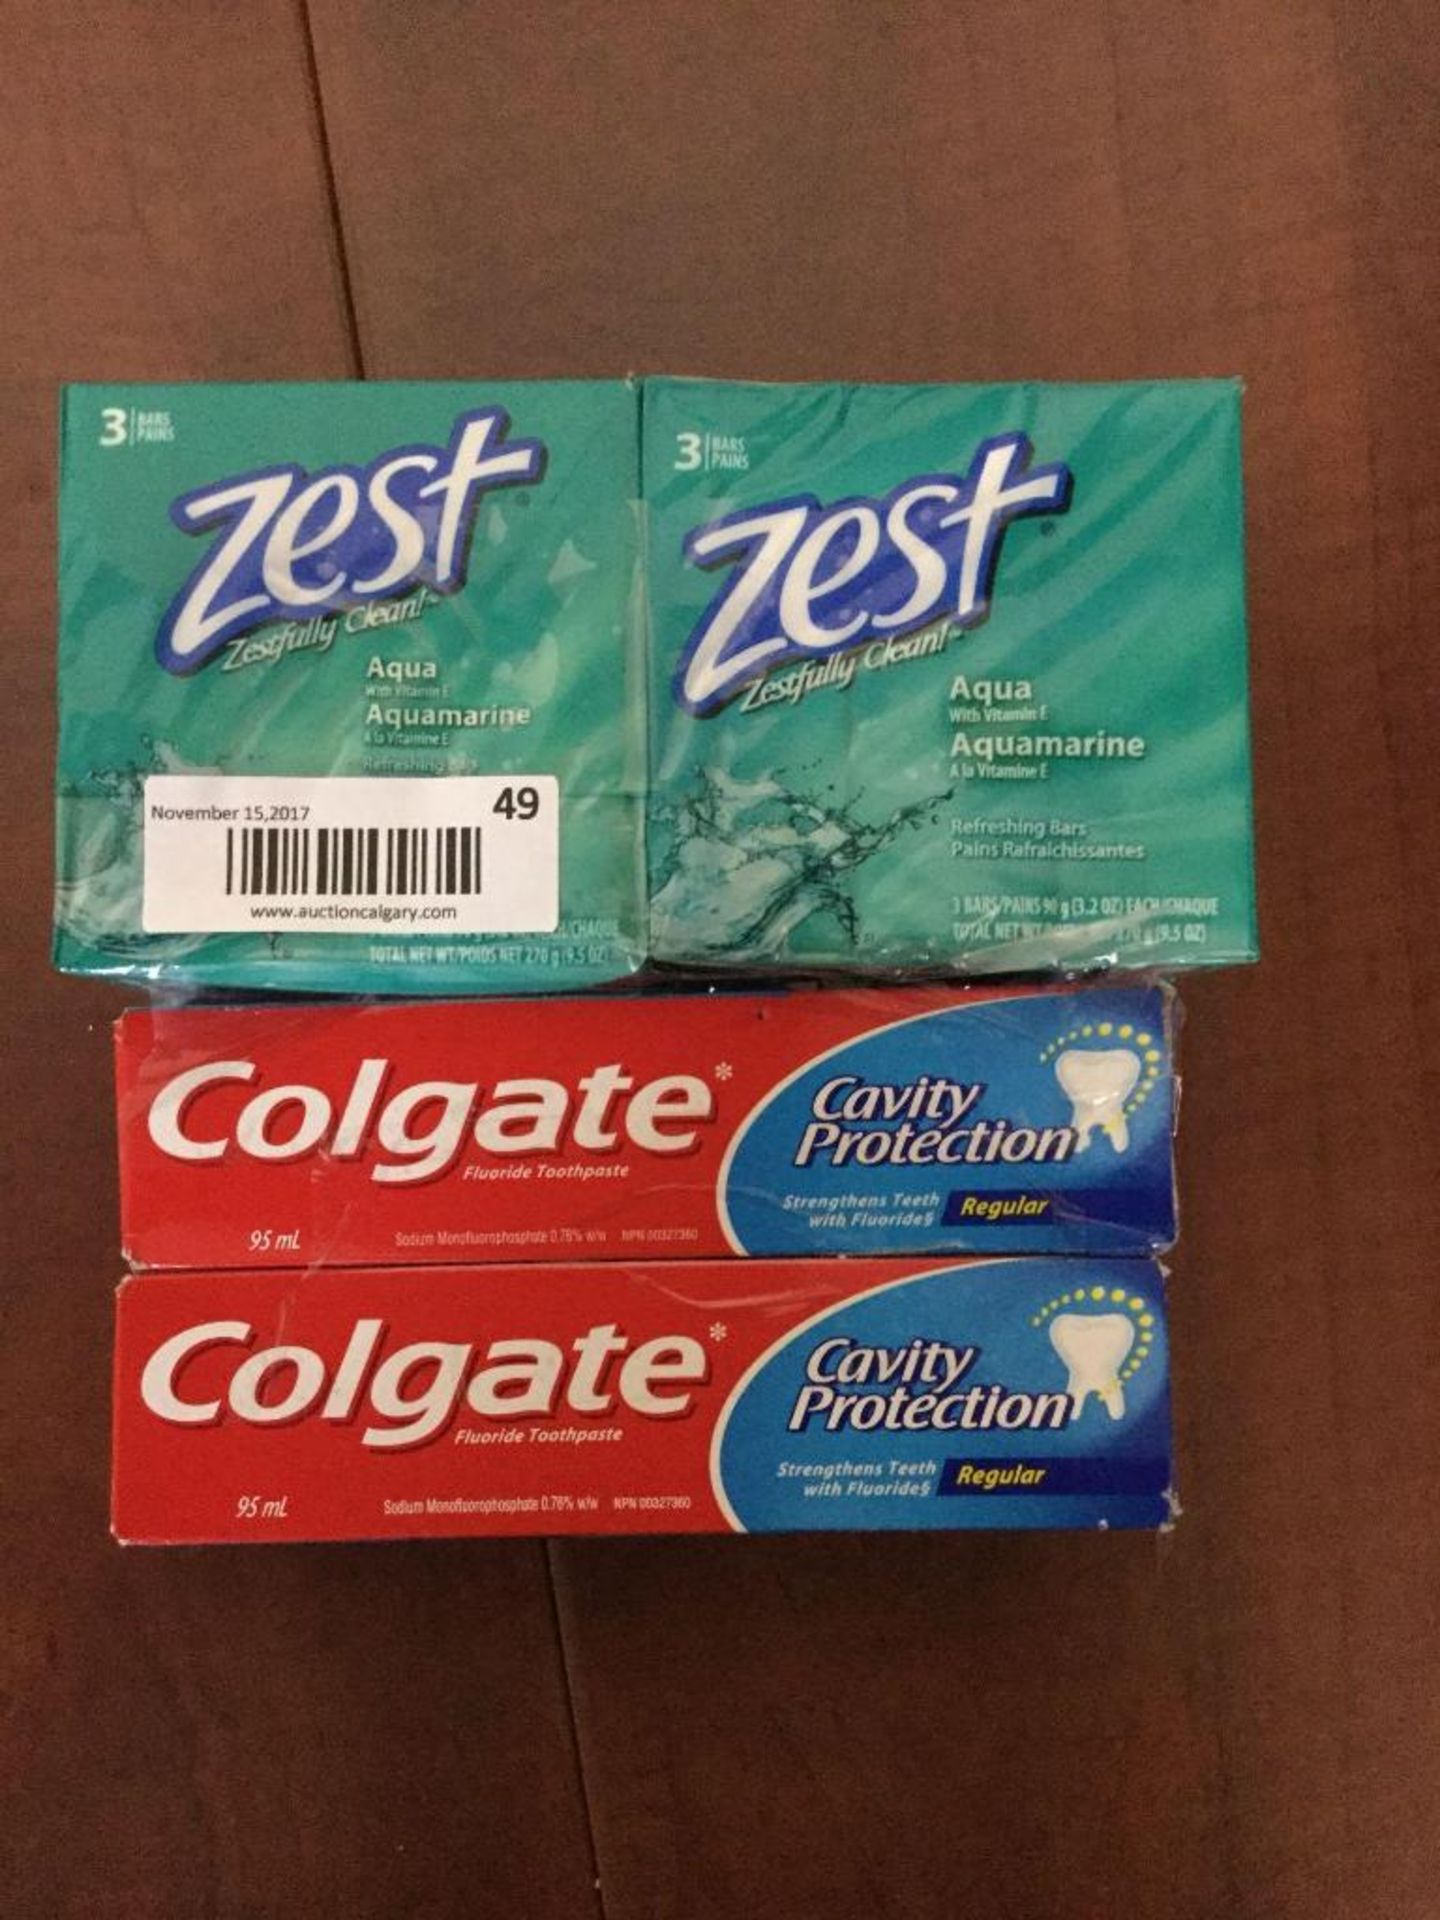 Lot of 4 - 2 x 3 bars of Zest and 2 x 95 ml Colgate